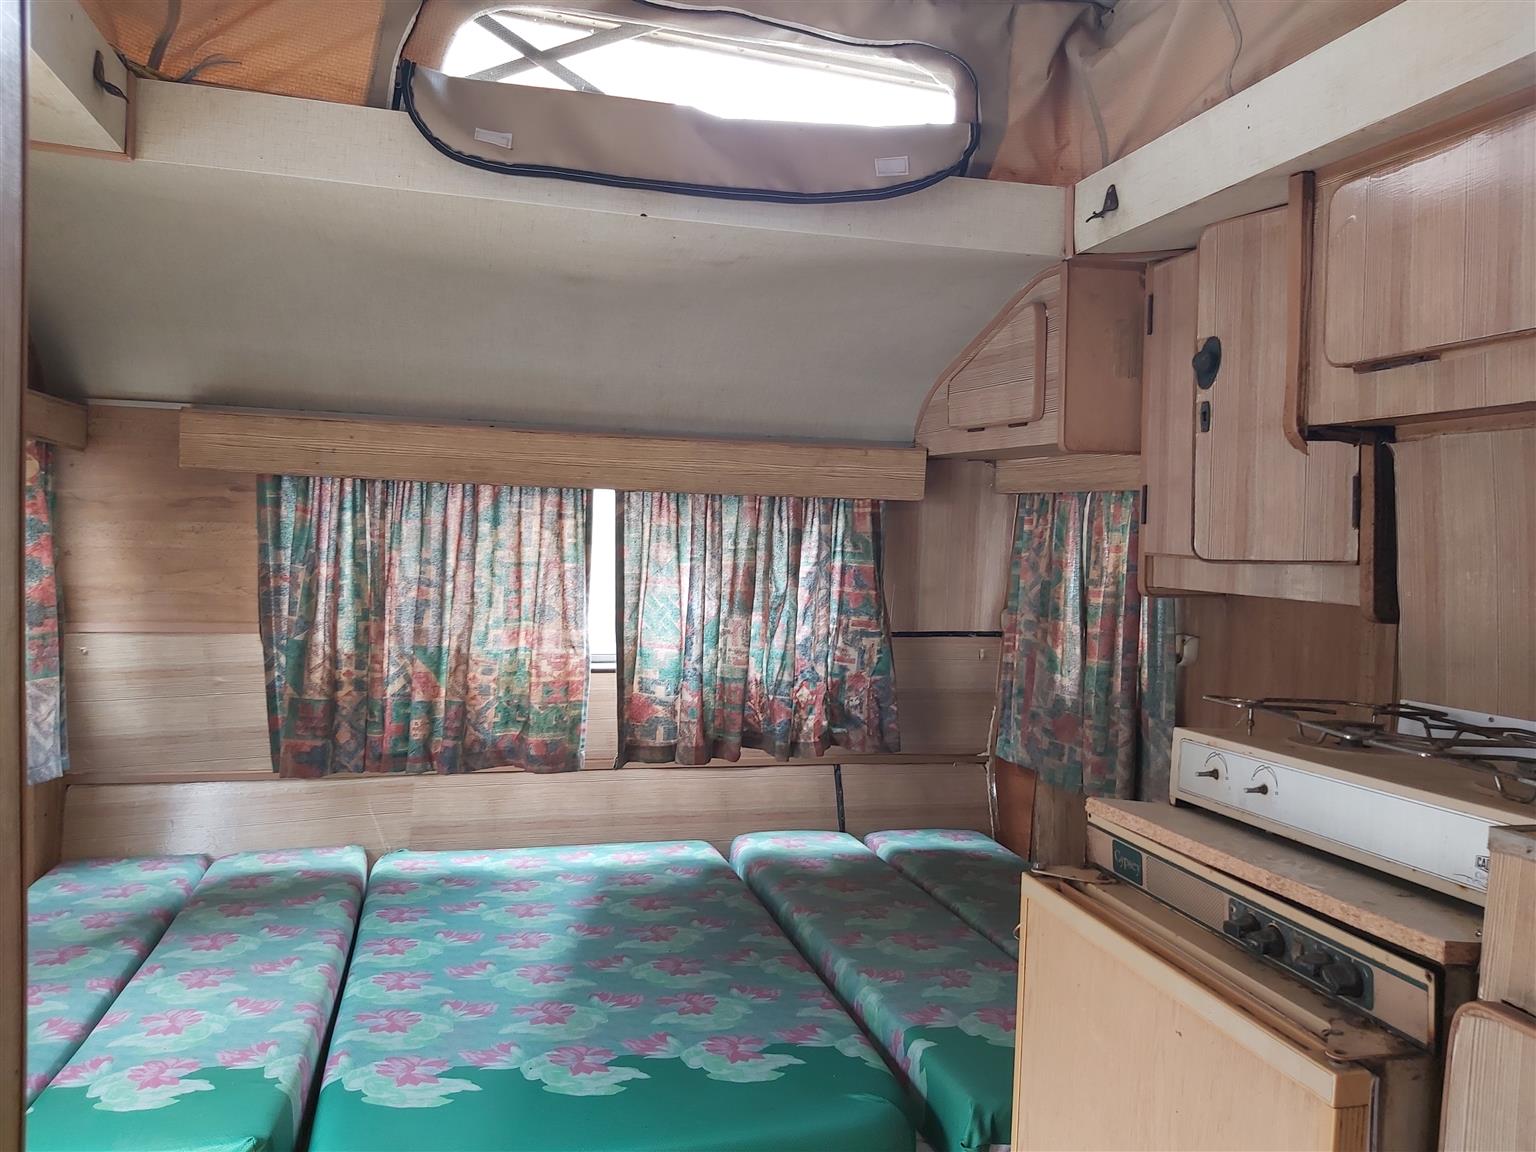 Gypsey Caravette 5 caravan ideal for fishing